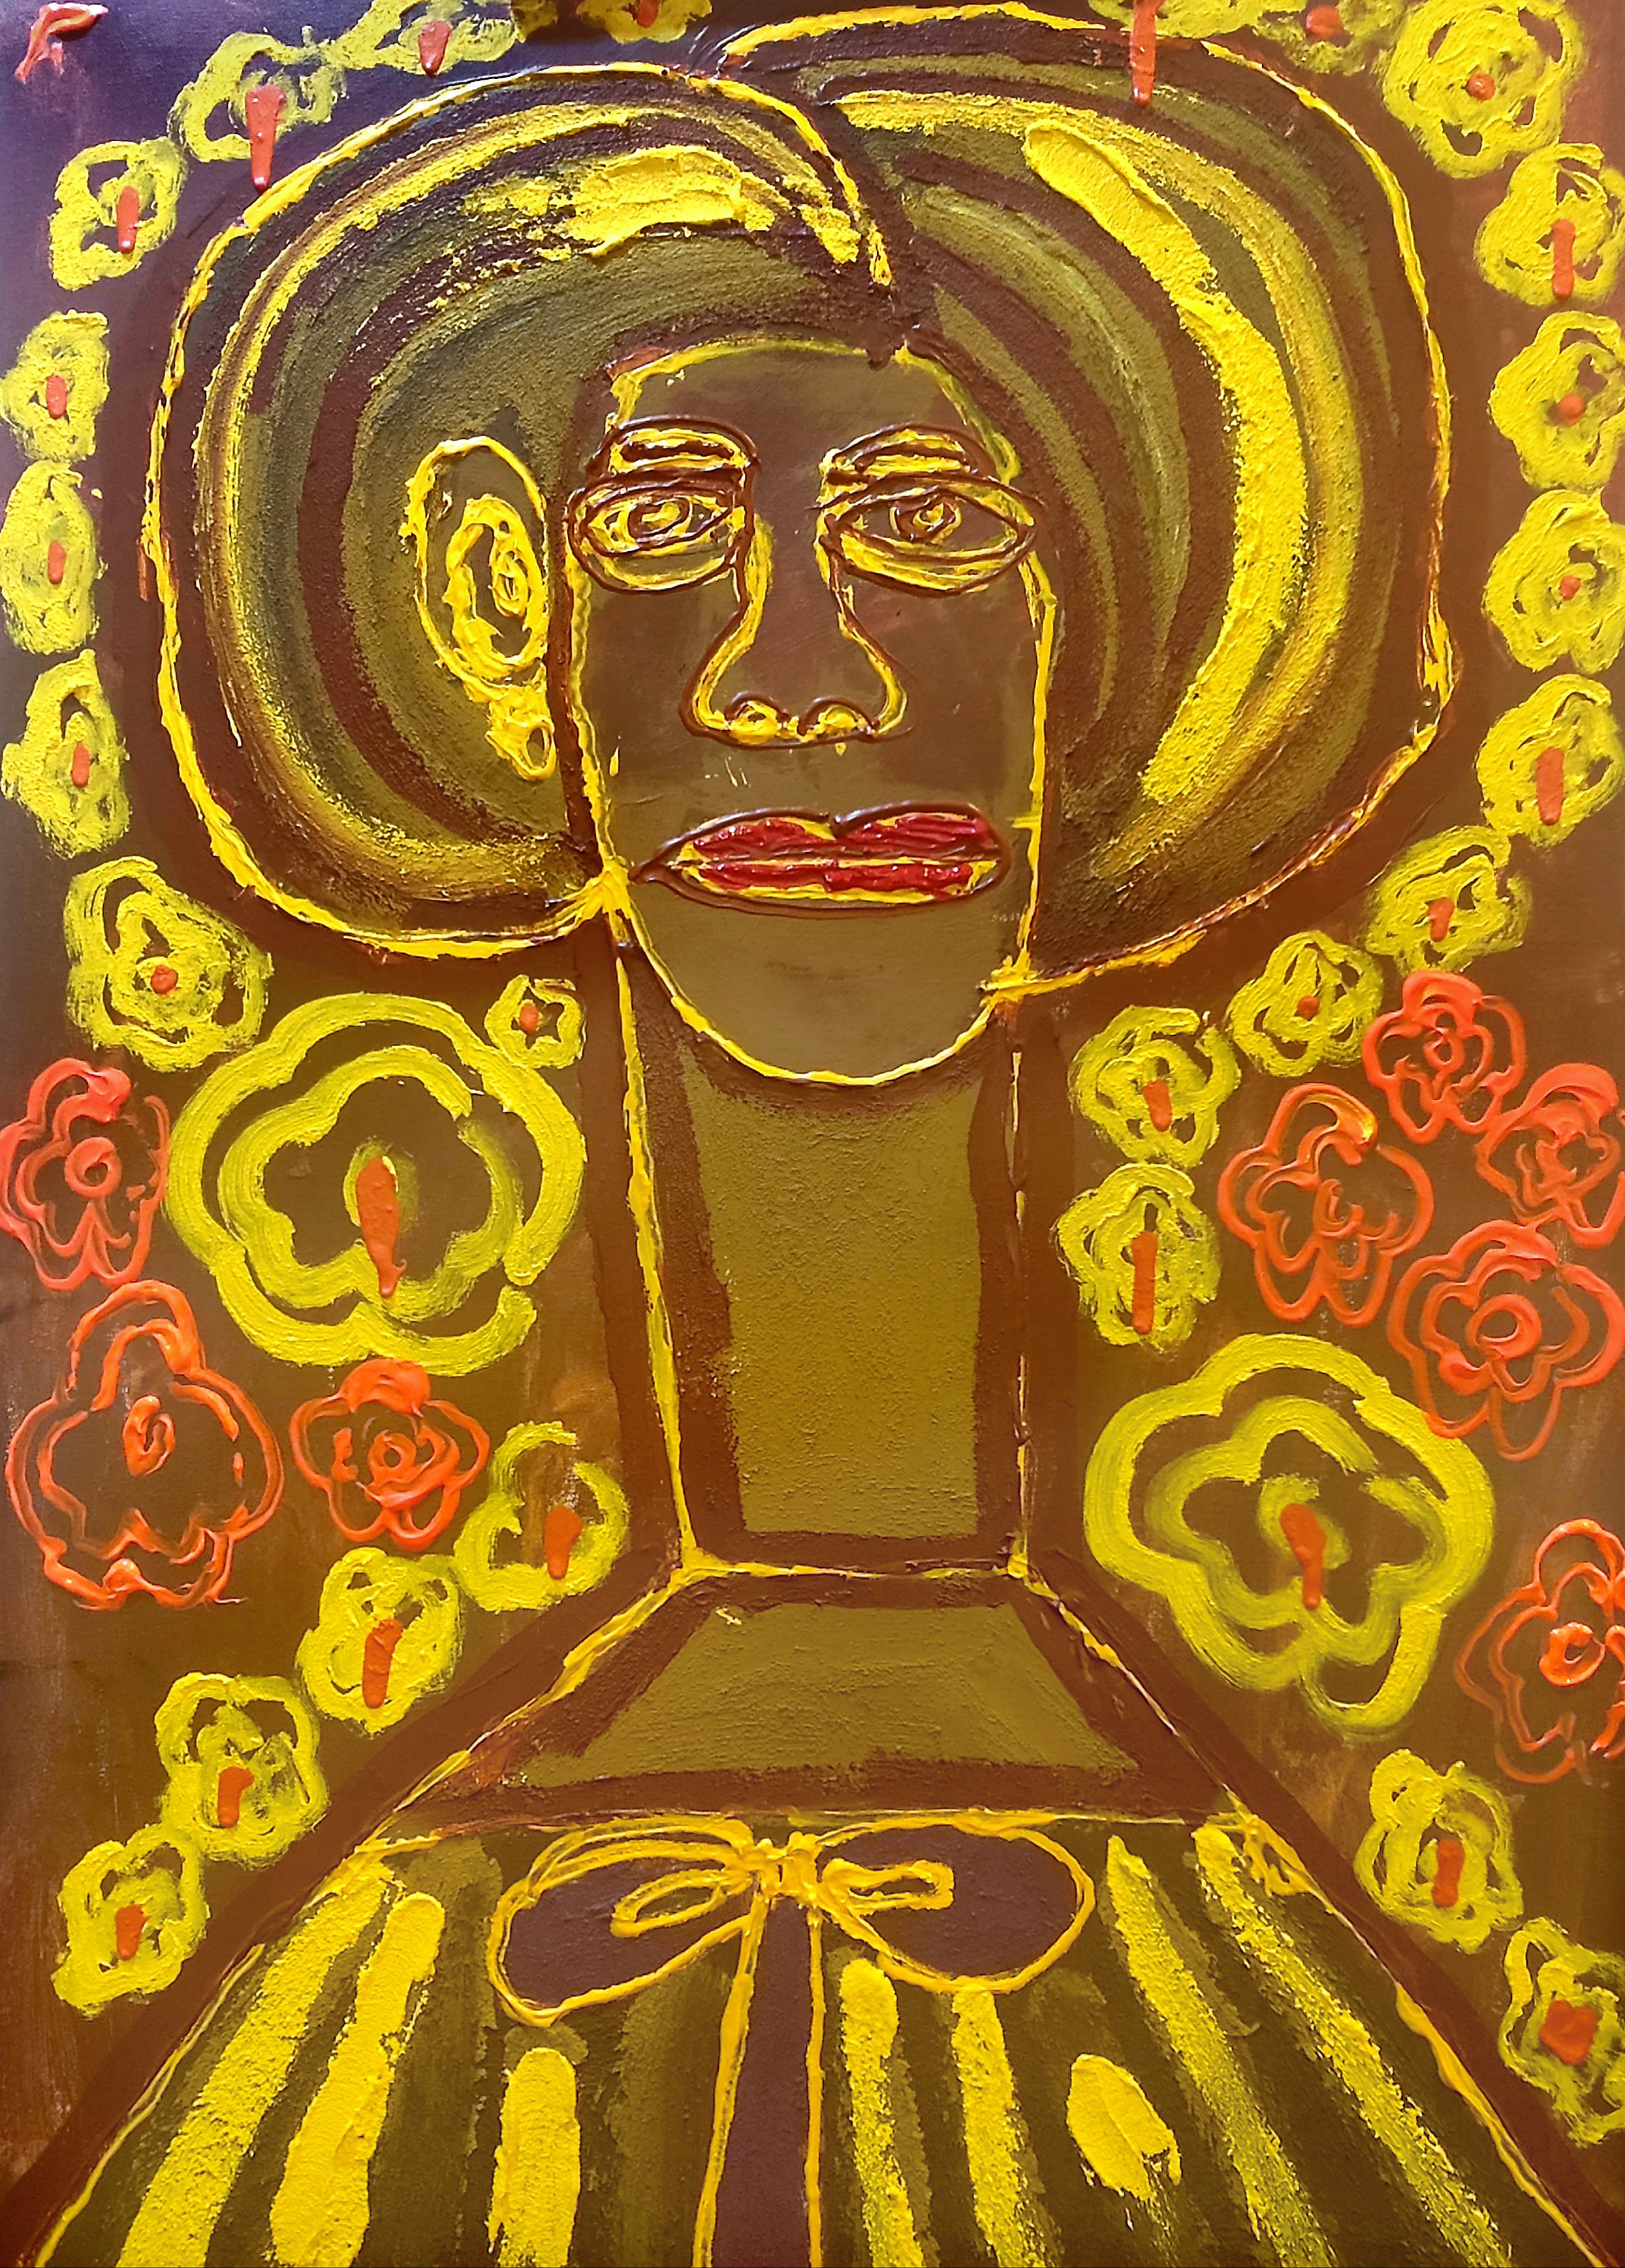 strong woman 72x89cm mixed media on canvas.jpg